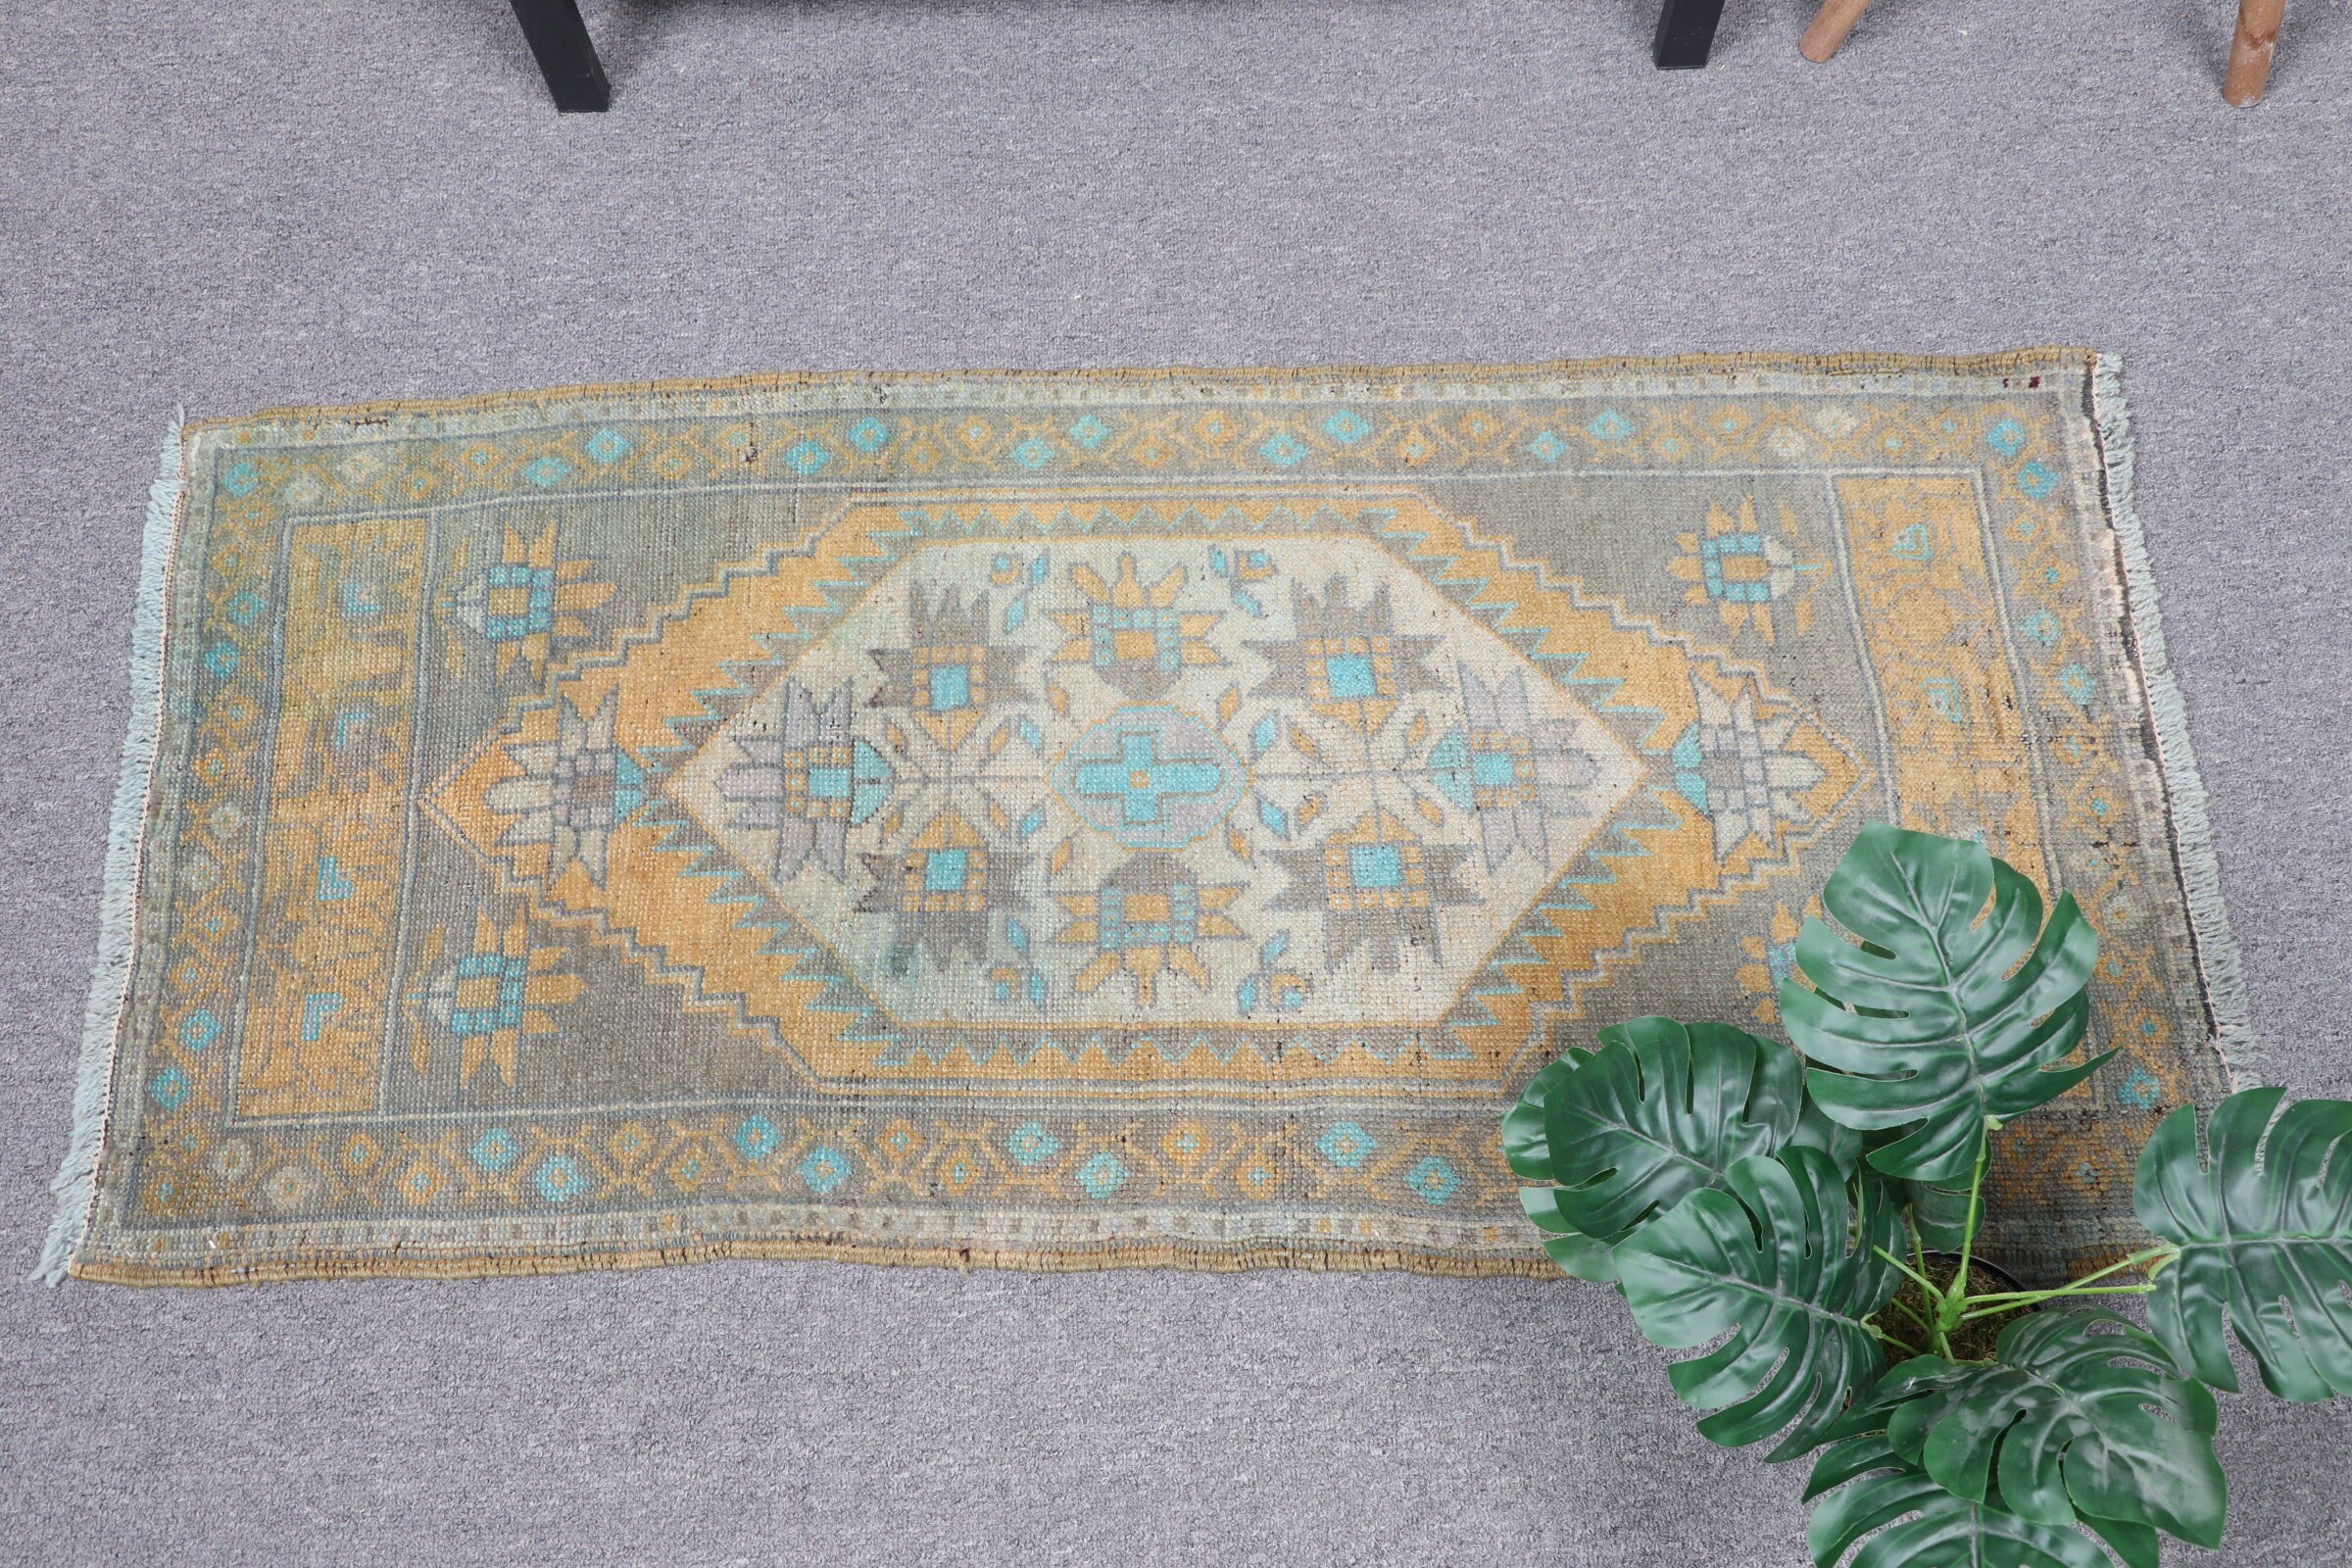 Cool Rugs, Turkish Rug, Bedroom Rug, Wall Hanging Rug, Kitchen Rug, Green Moroccan Rug, Rugs for Entry, 1.7x3.6 ft Small Rug, Vintage Rugs